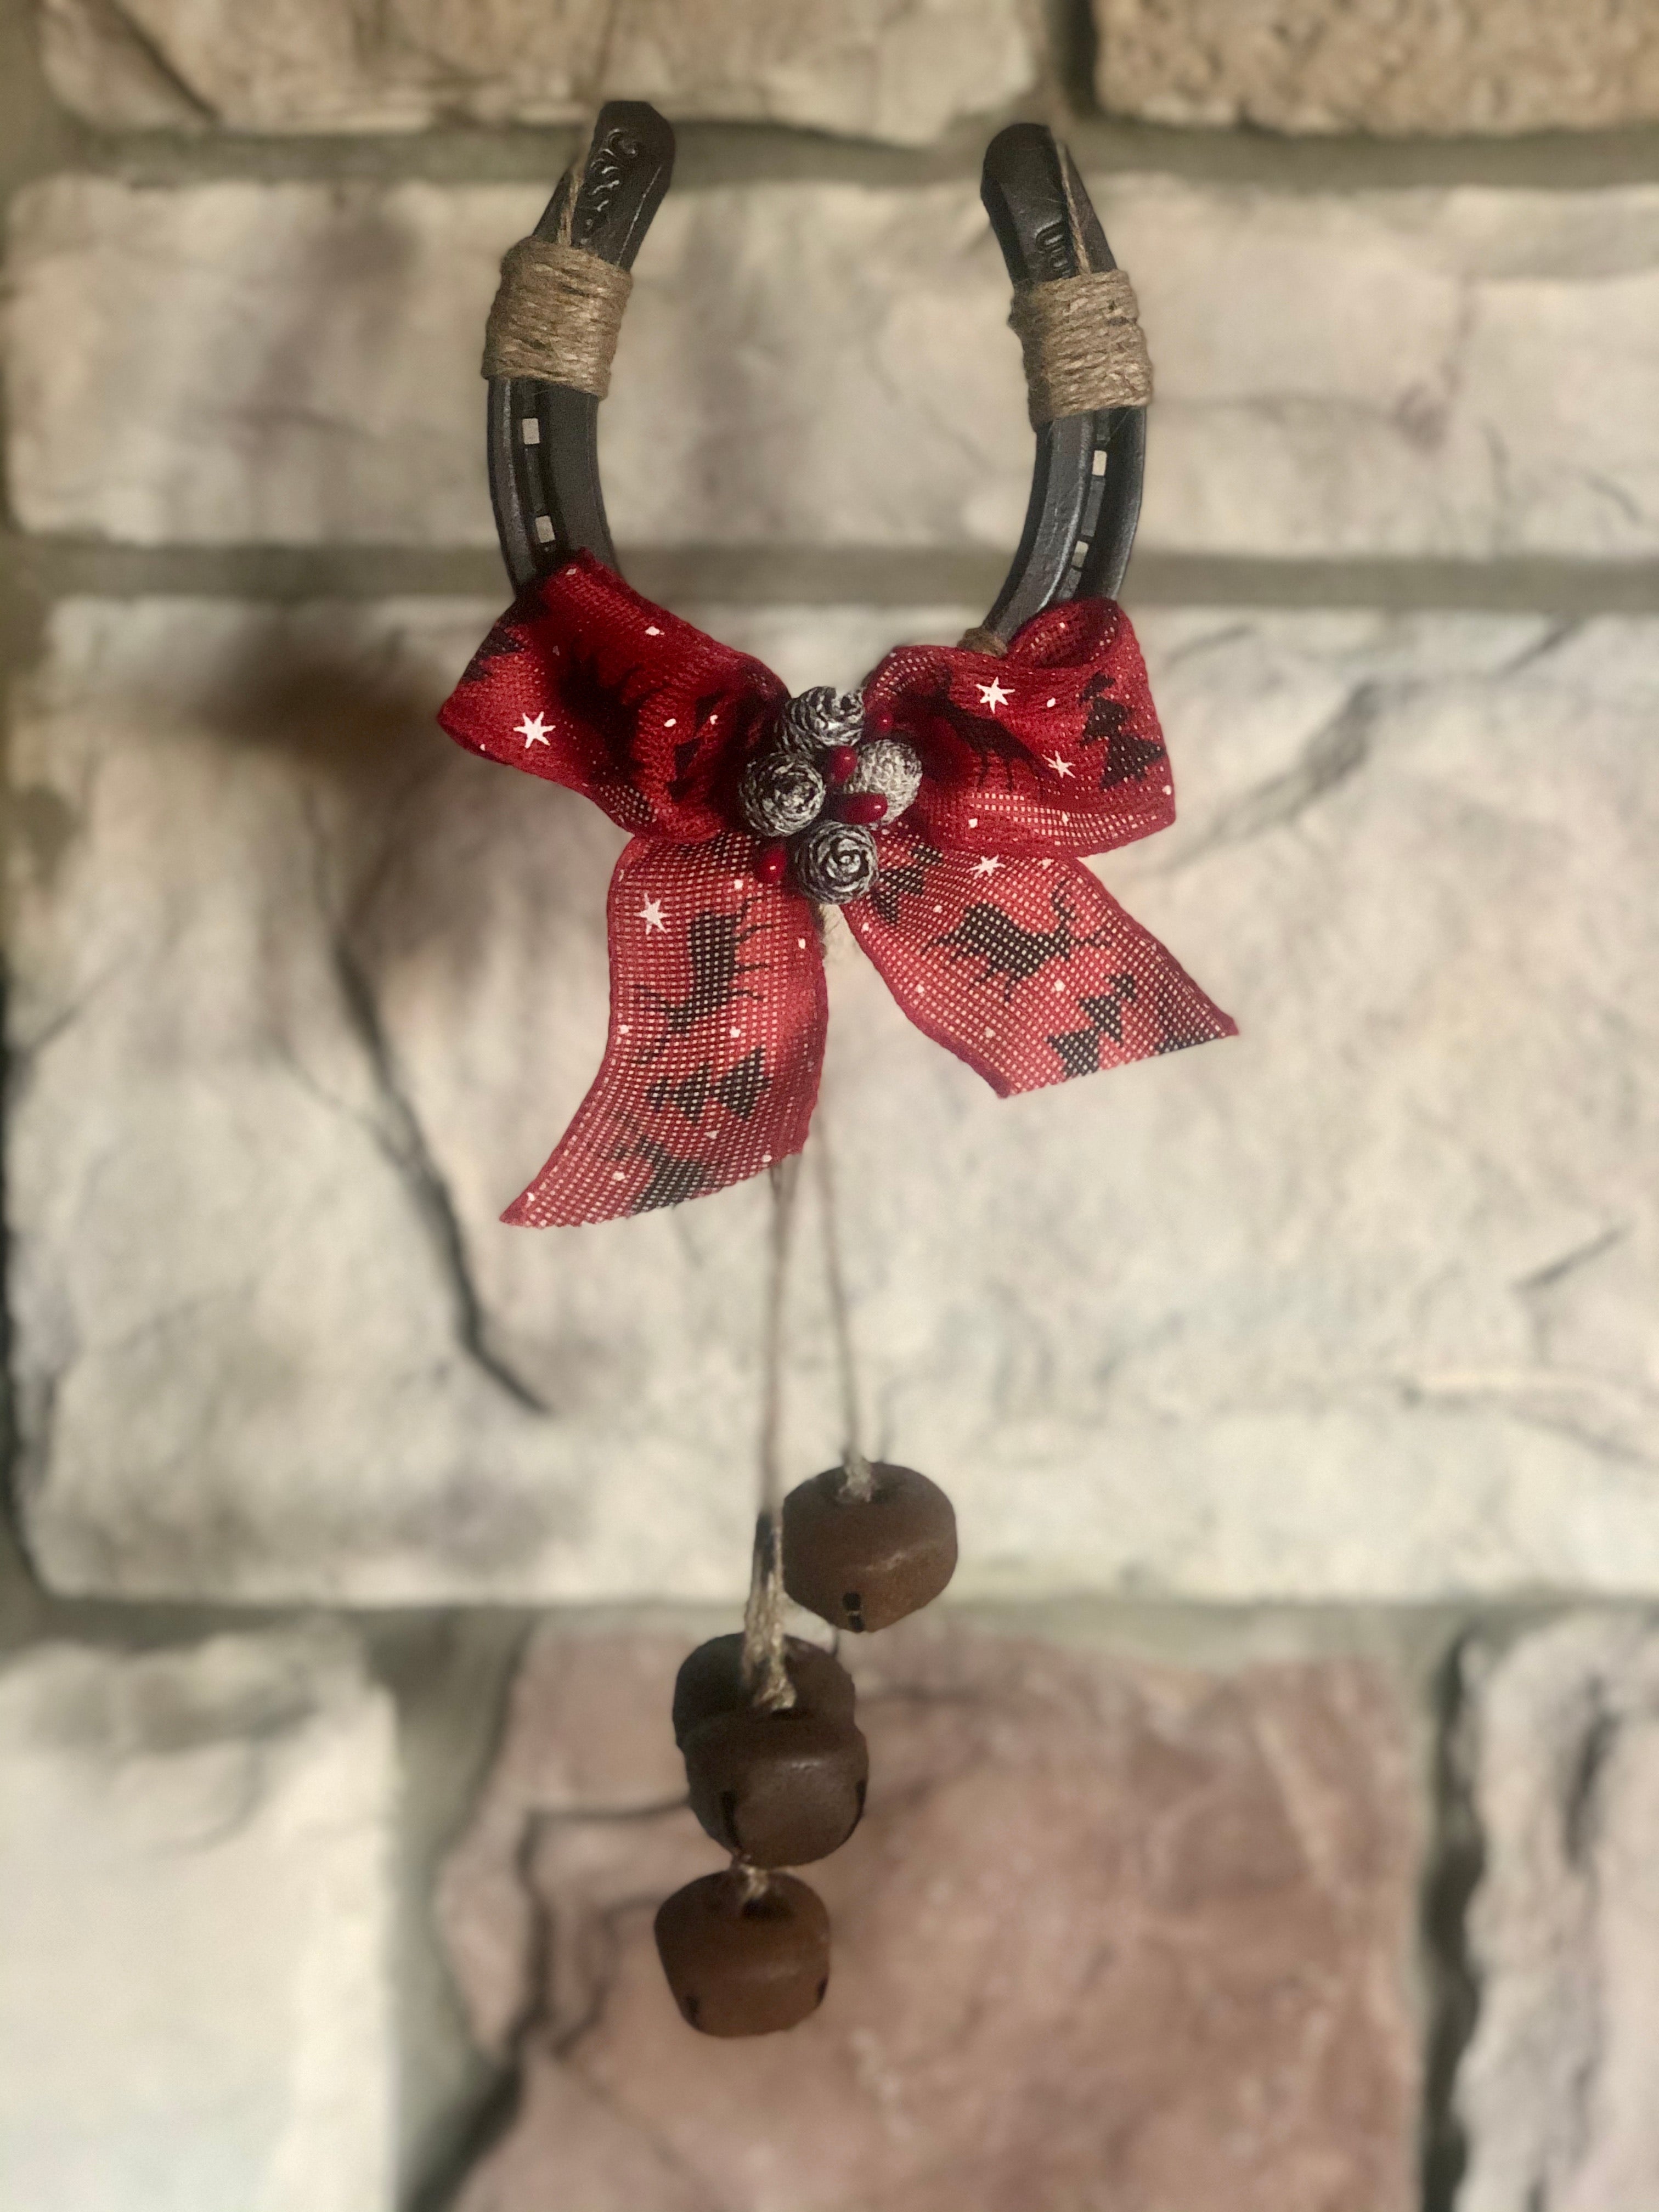 Christmas Holiday Horseshoe Decor with Bells - Back Home Country Acres